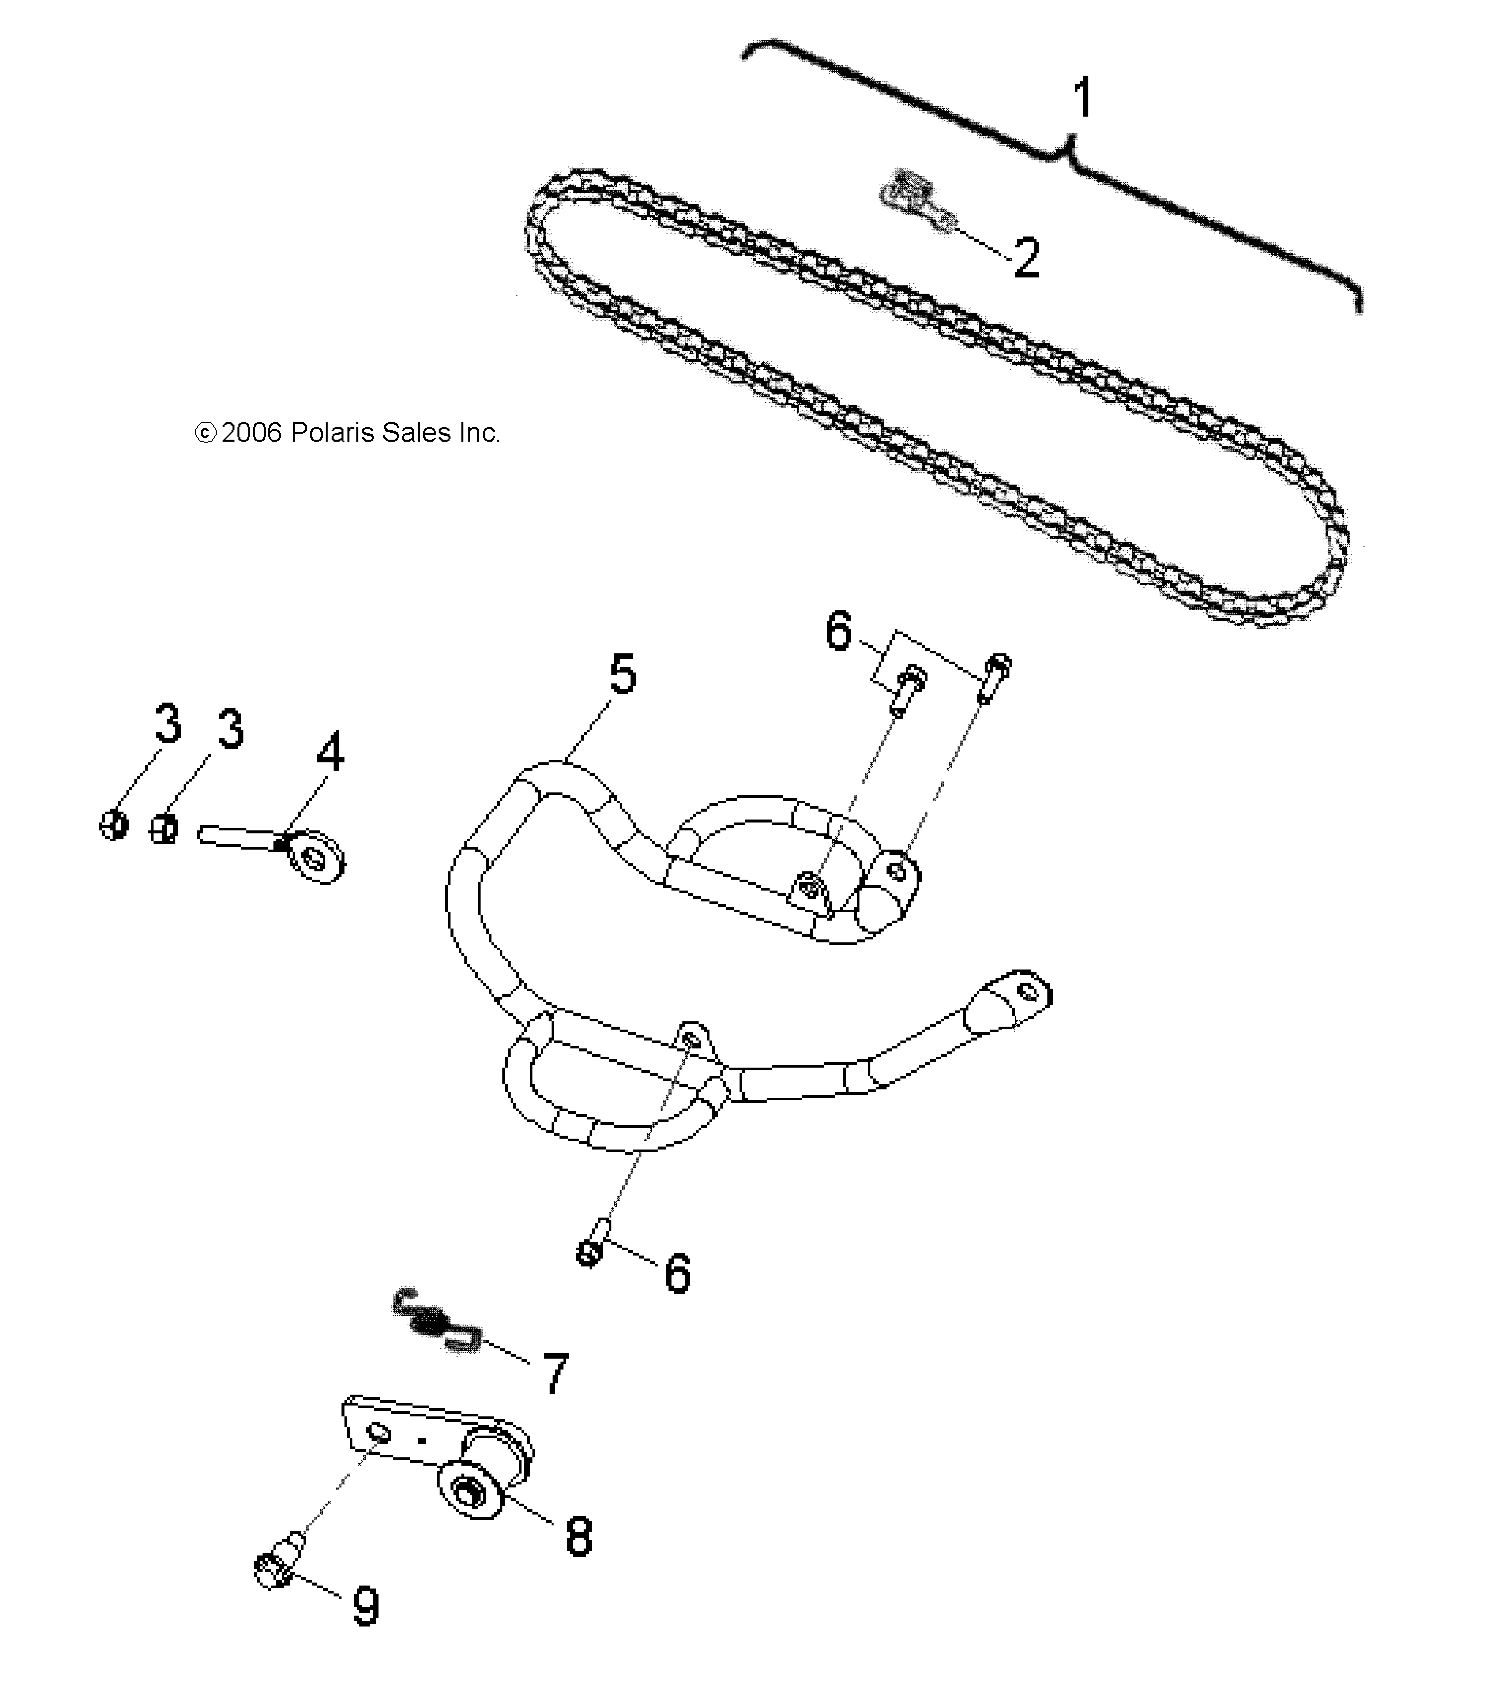 Part Number : 0453557 CHAIN ADJUSTER